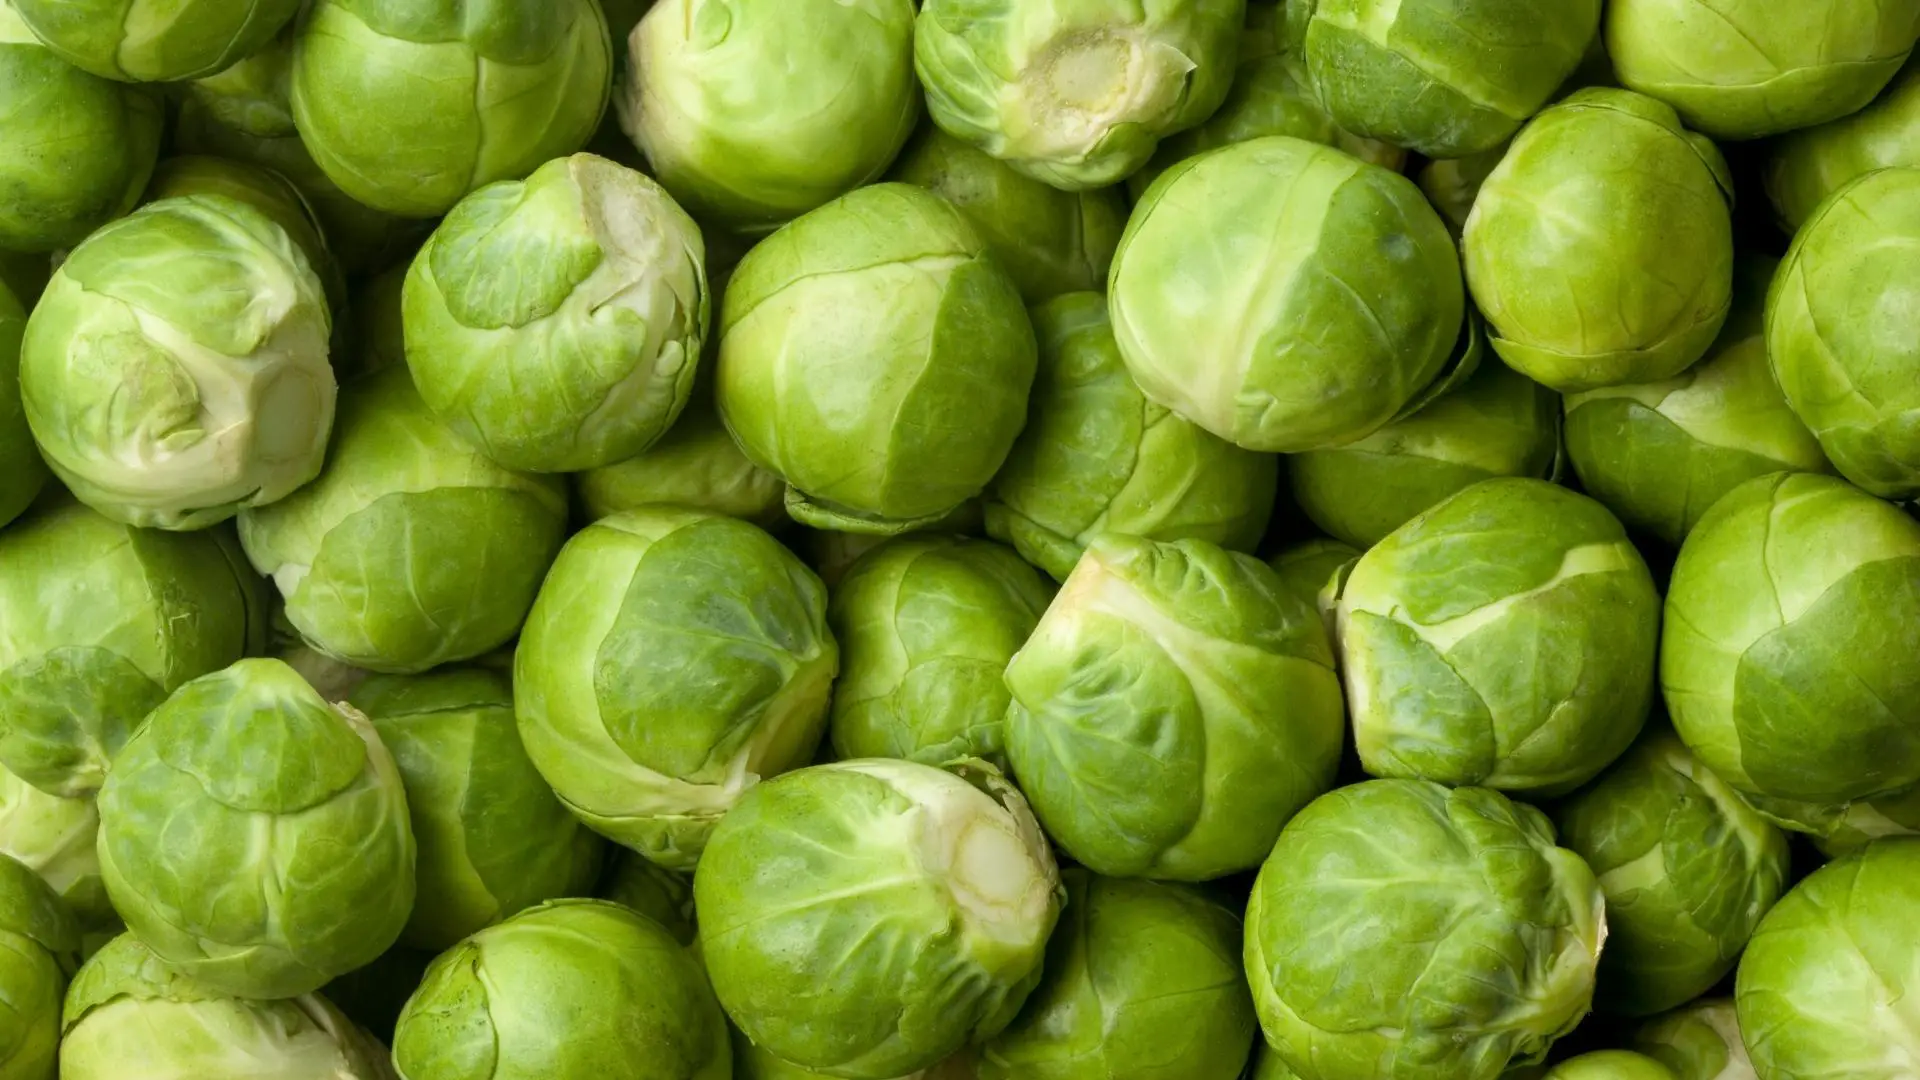 Can chickens eat Brussel sprouts